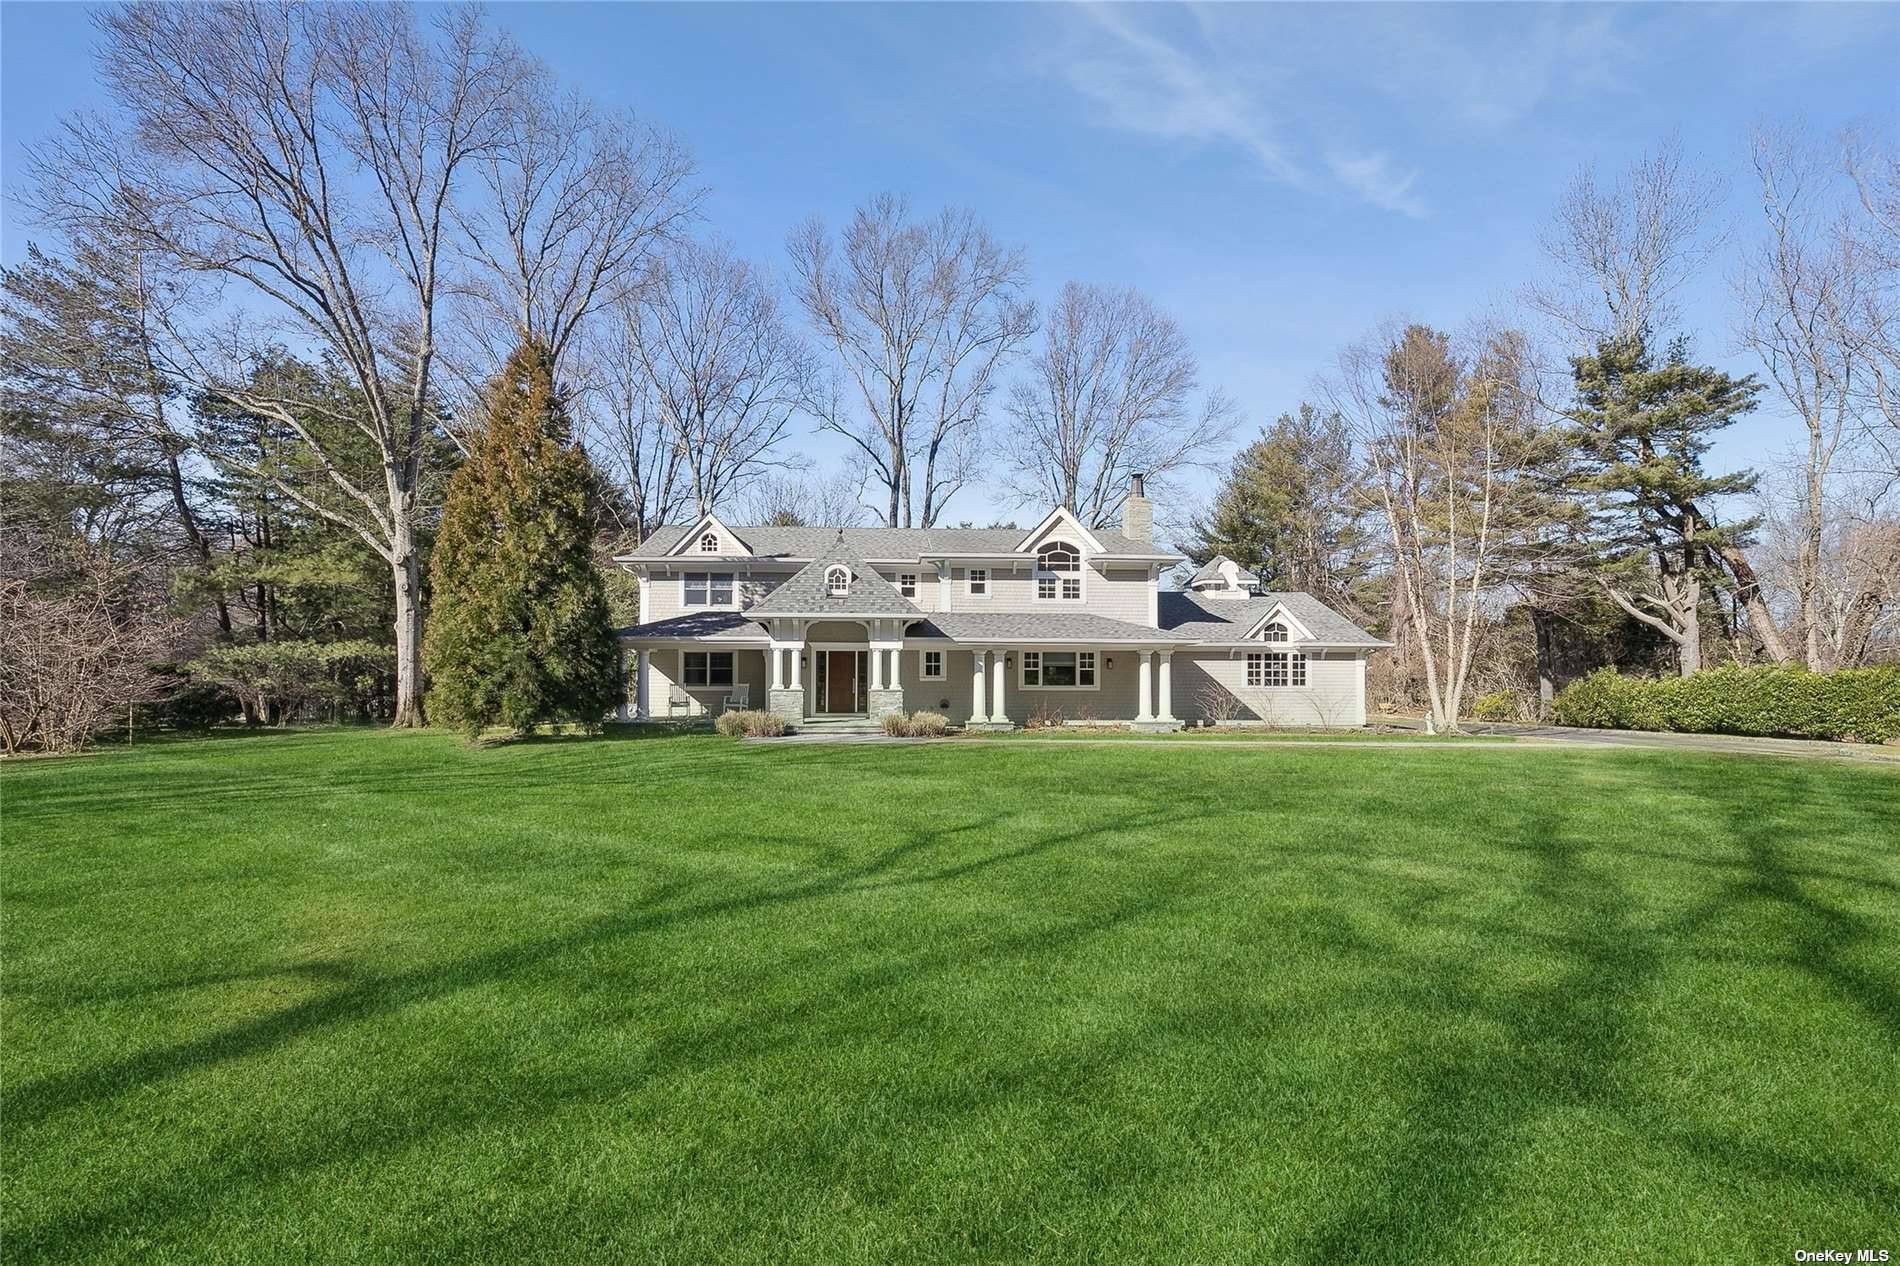 Welcome to this stunning 2 acre home in Jericho Muttontown on Long Island's prestigious North Shore.